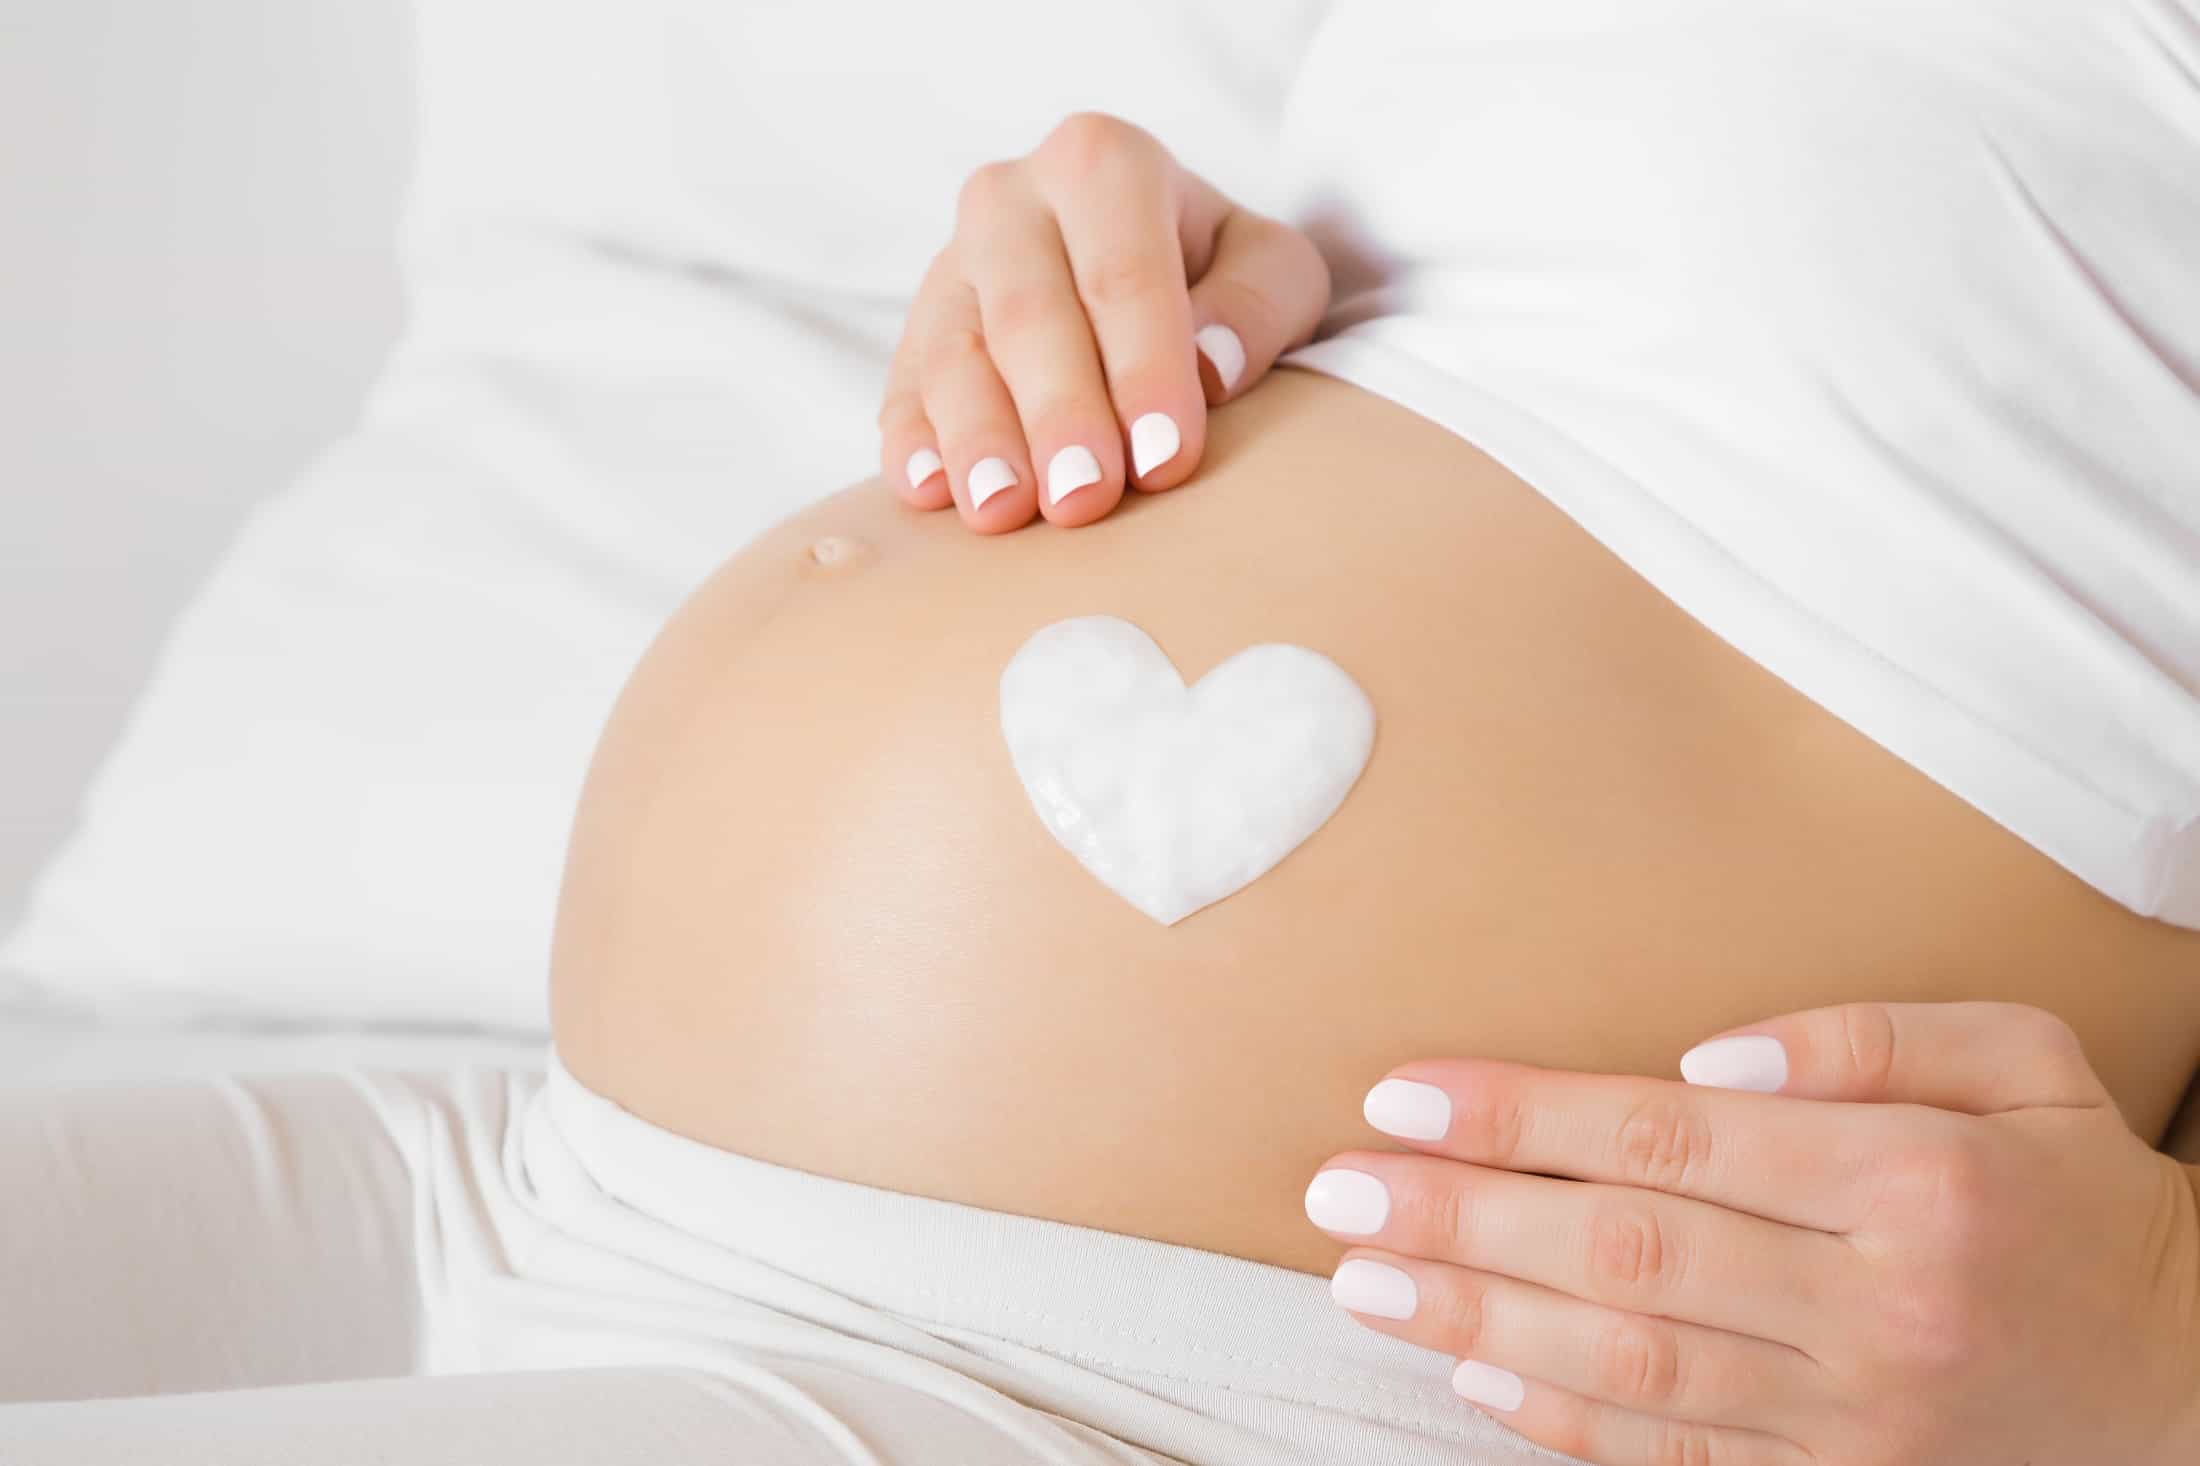 Have you heard of pregnancy tummy masks yet?